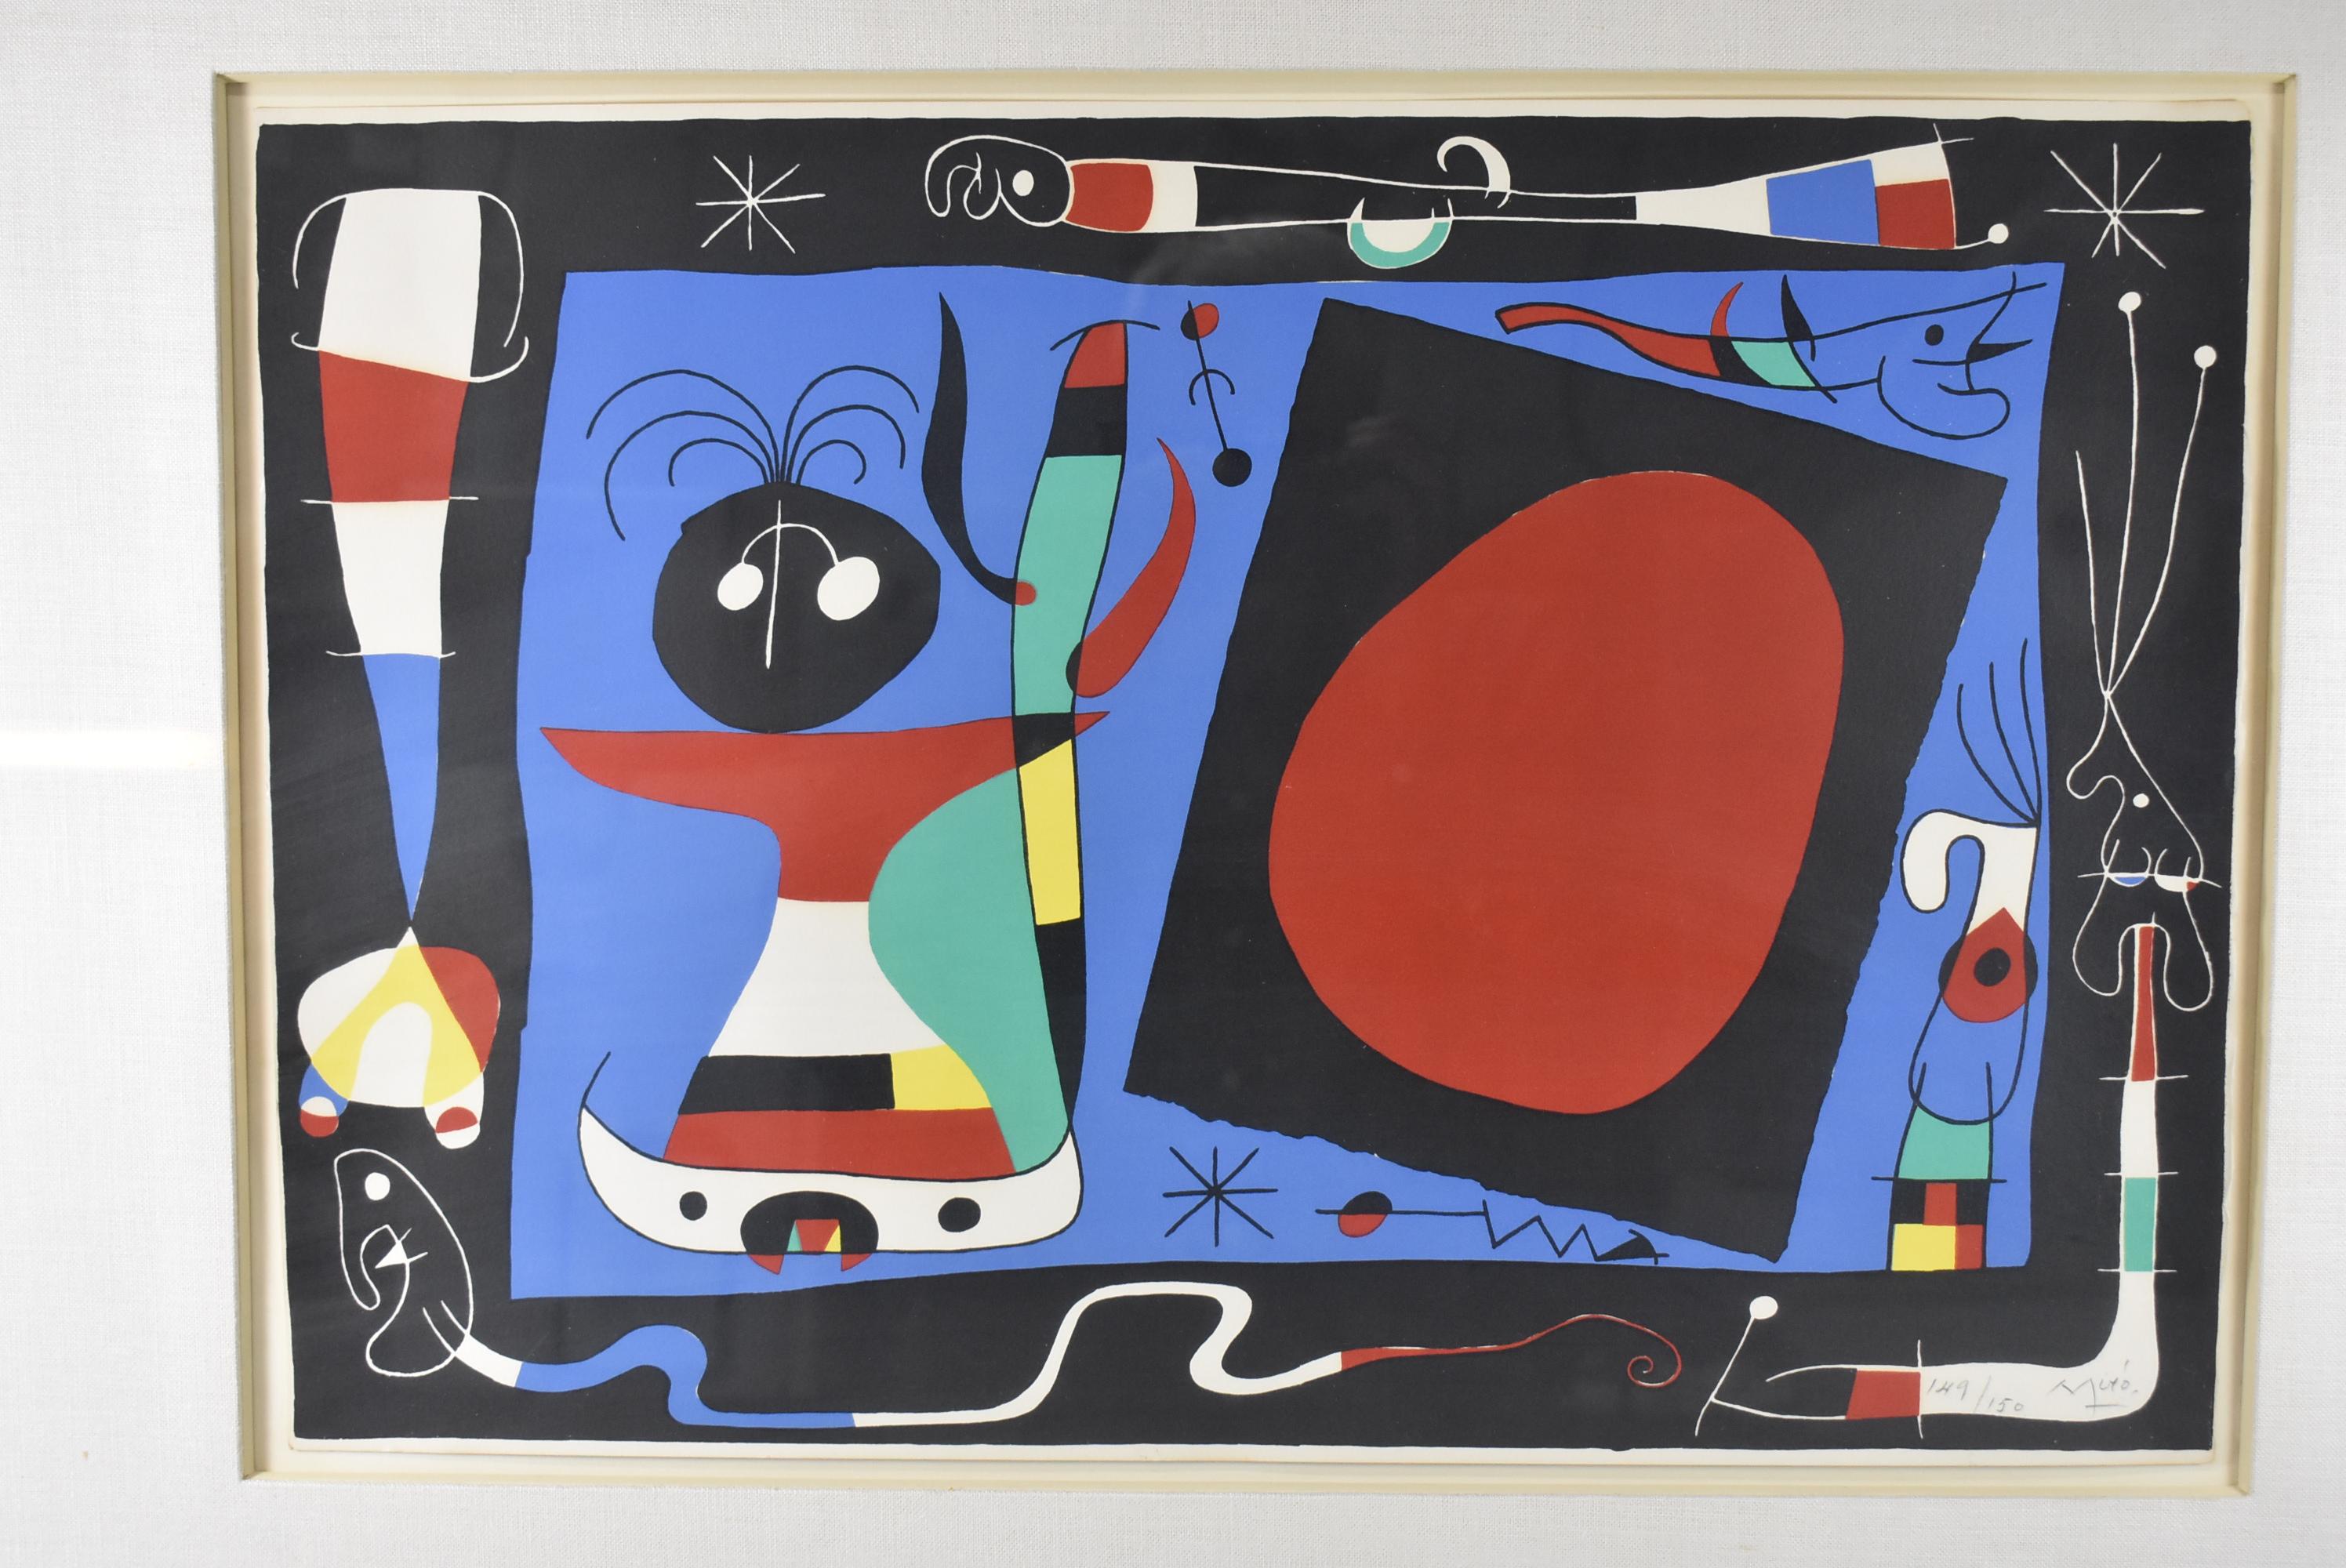 This is a gorgeous color lithograph by one of the great masters of 20th century Modernism, Joan Miró, showing the boldly colorful, curvilinear abstract composition that is so classic to Miró's most beloved work. Joan Miró (1893-1983) is widely